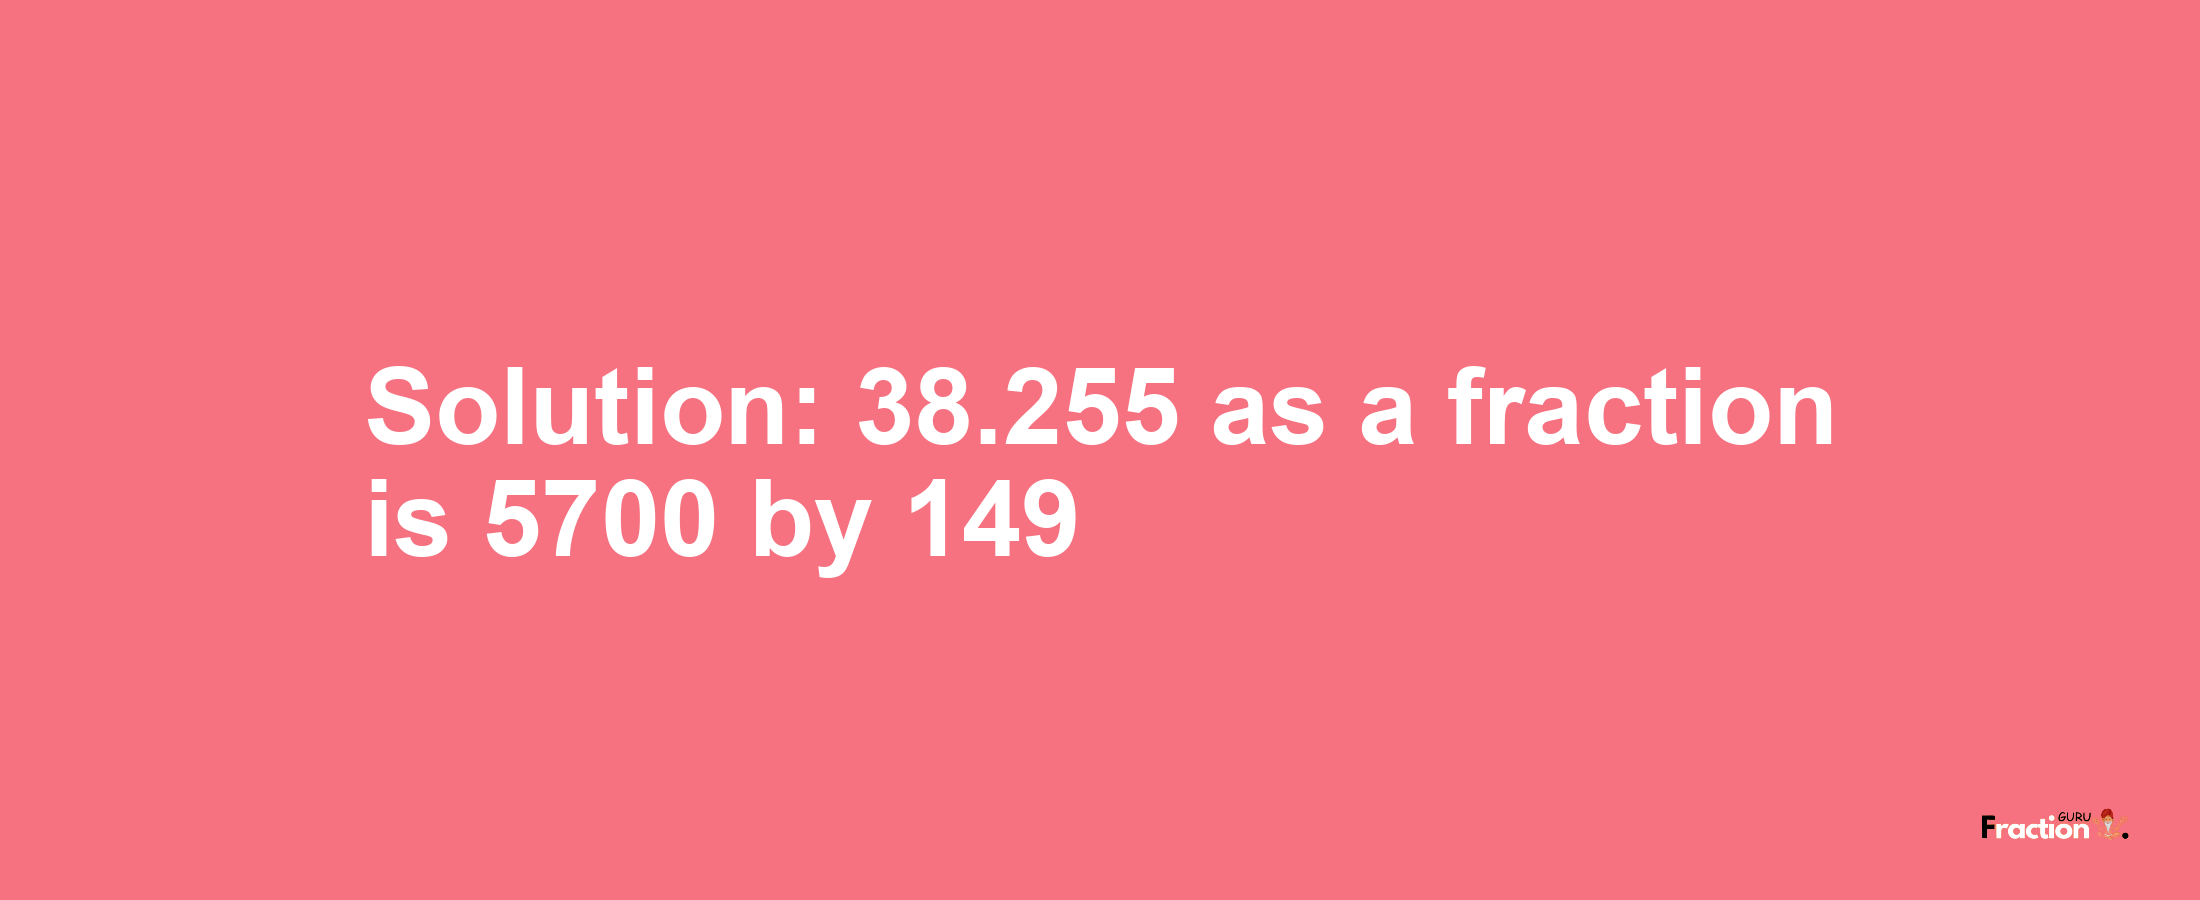 Solution:38.255 as a fraction is 5700/149